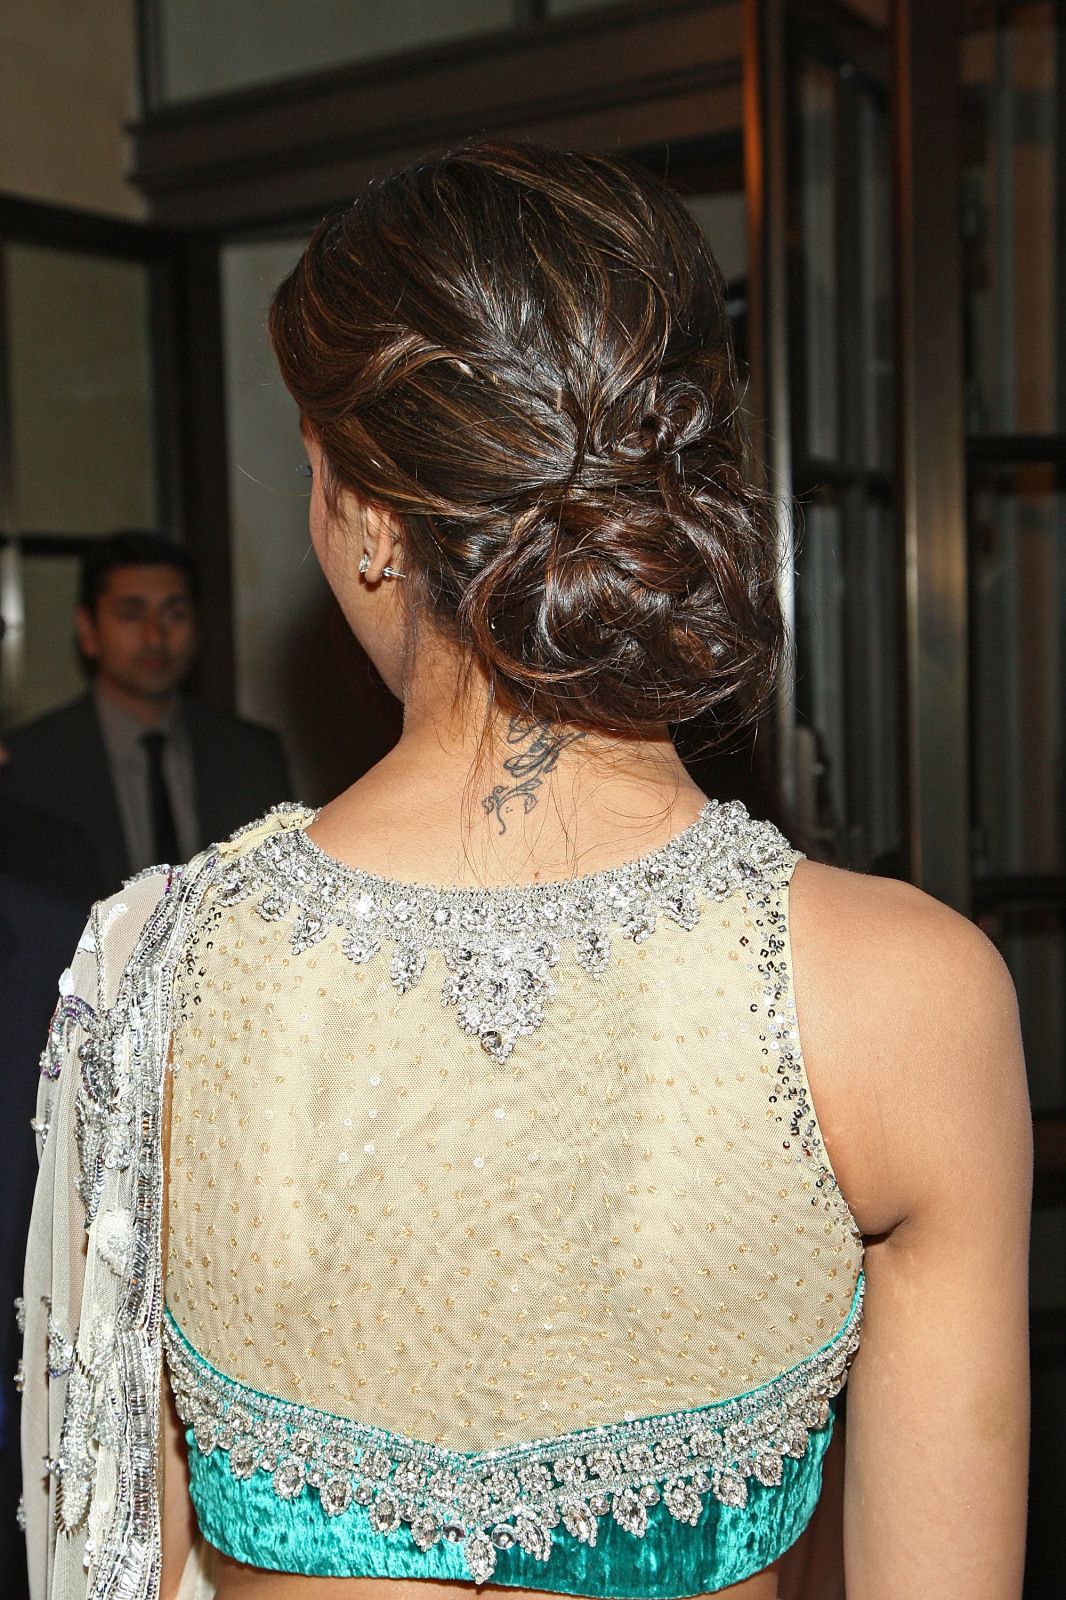 Learn it from Deepika: Why getting inked for love is a bad idea